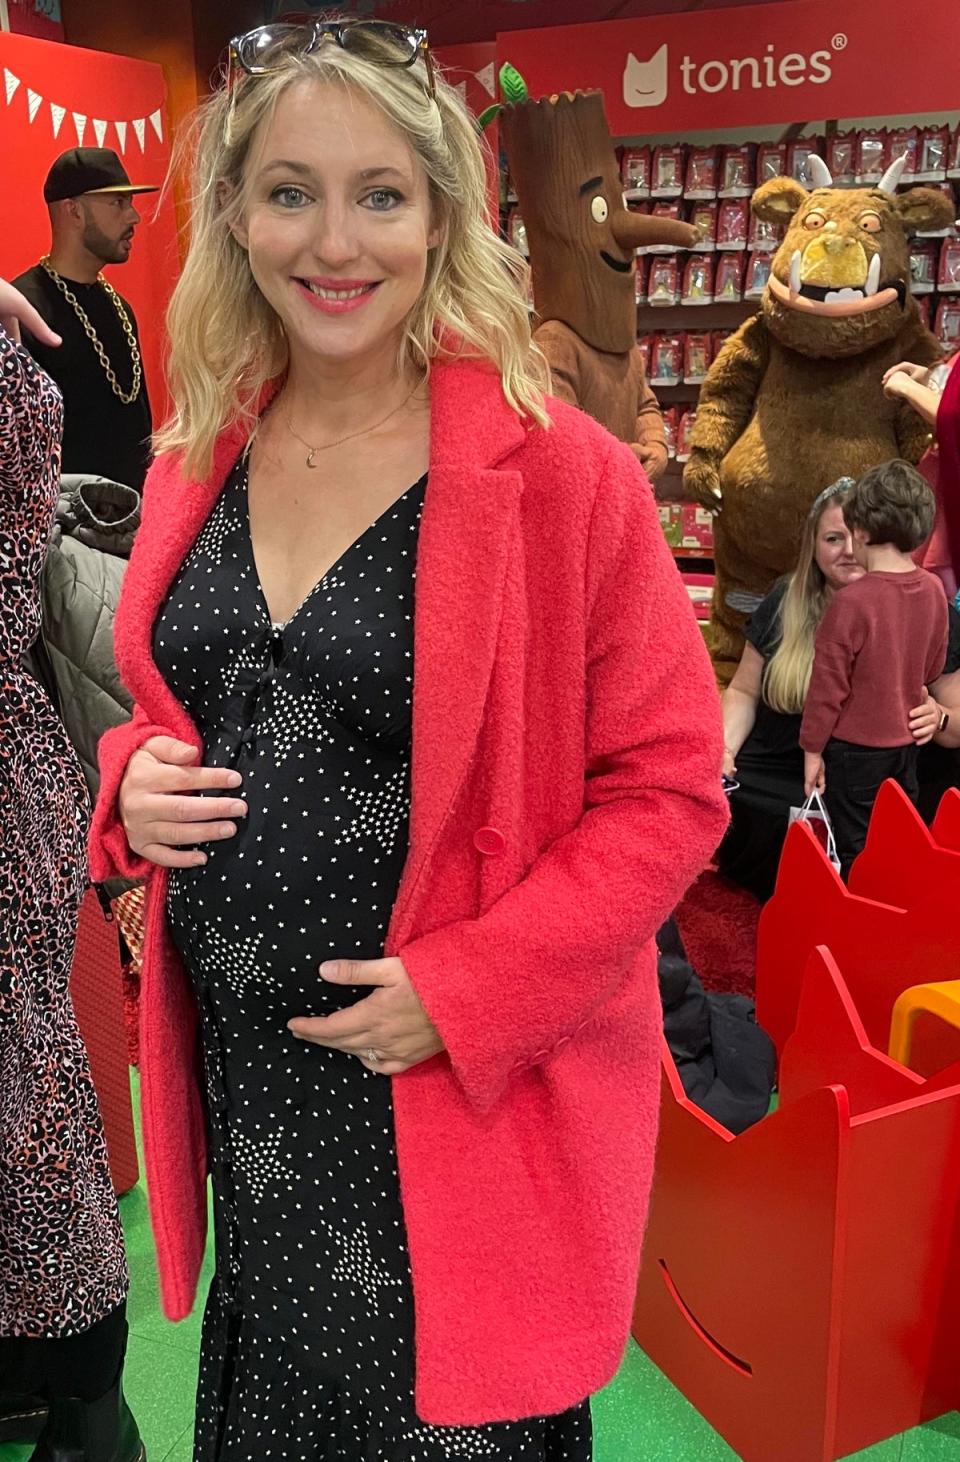 Ali Bastian is currently pregnant with her second child (Tonies x Hamleys)